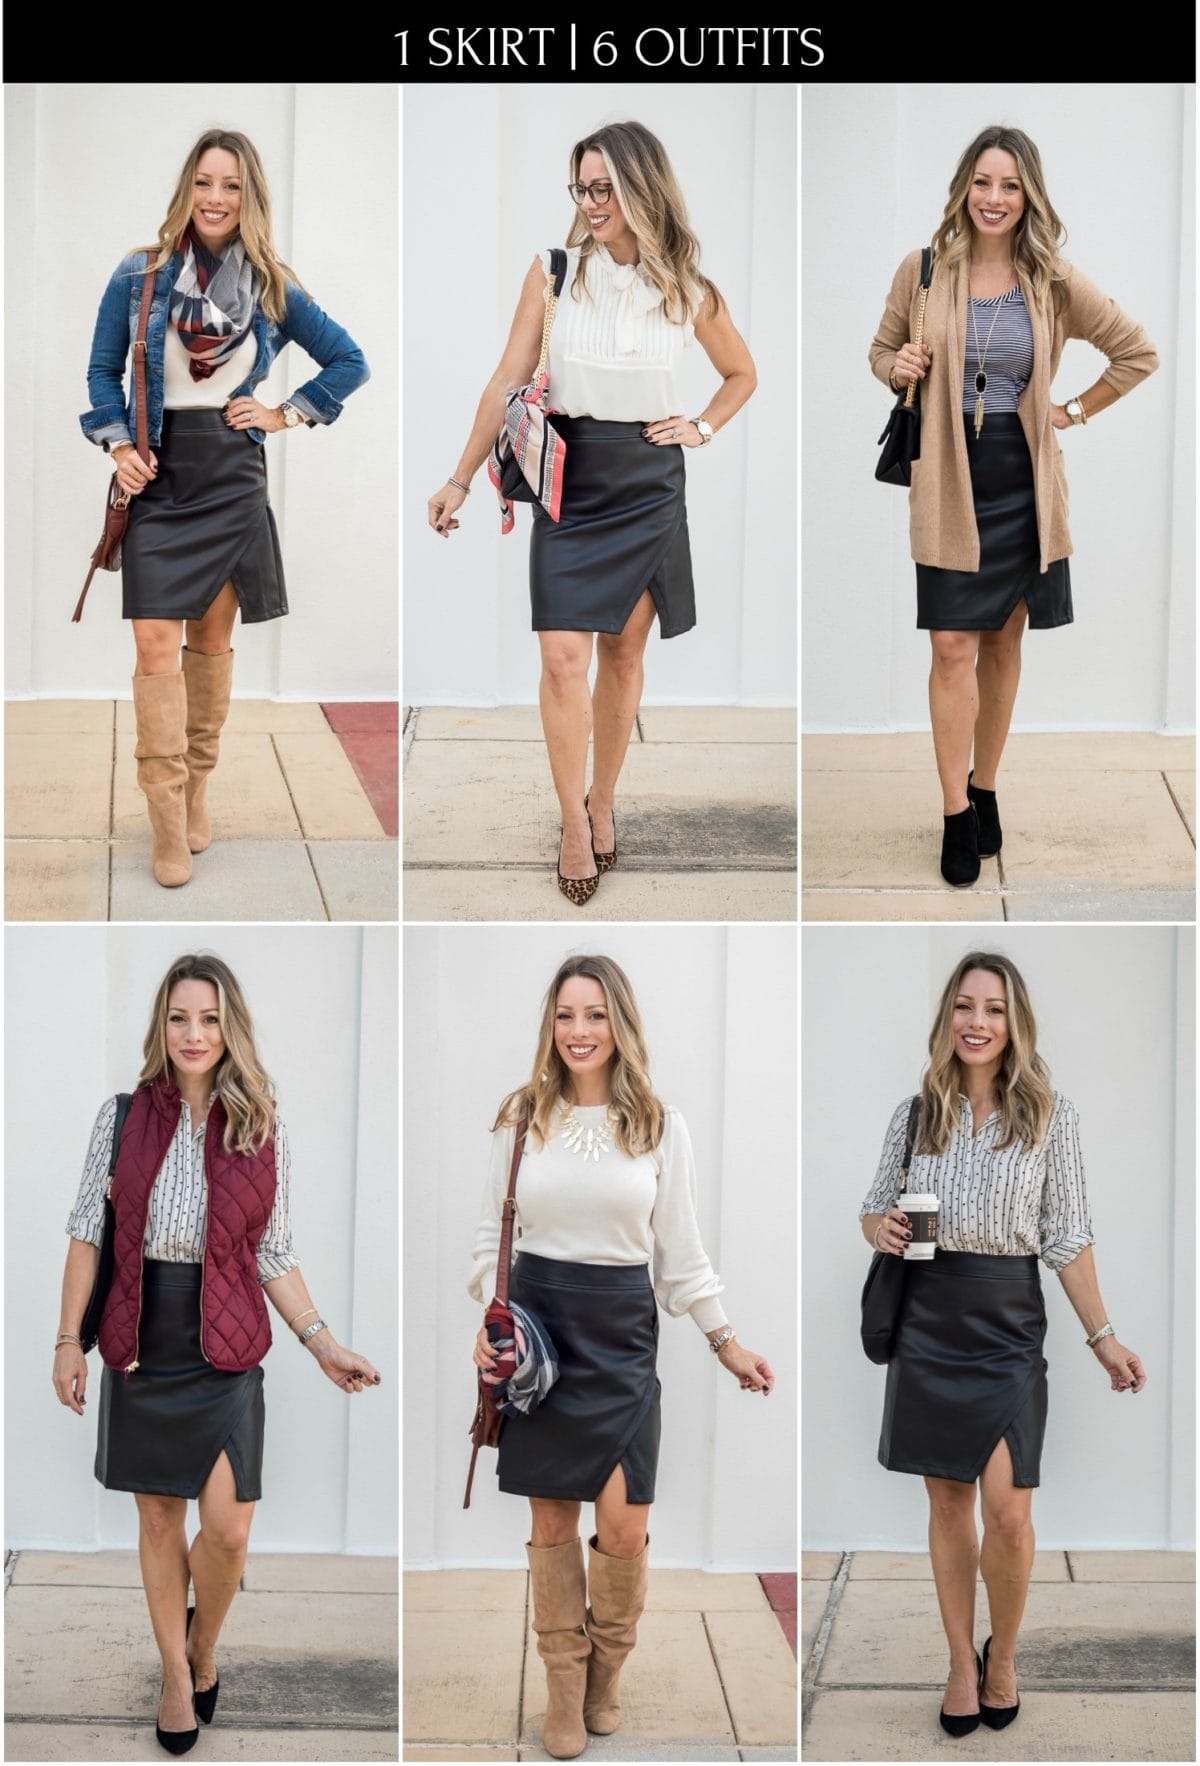 6 Black Leather Skirt Outfit Ideas For Fall • Honey We're Home